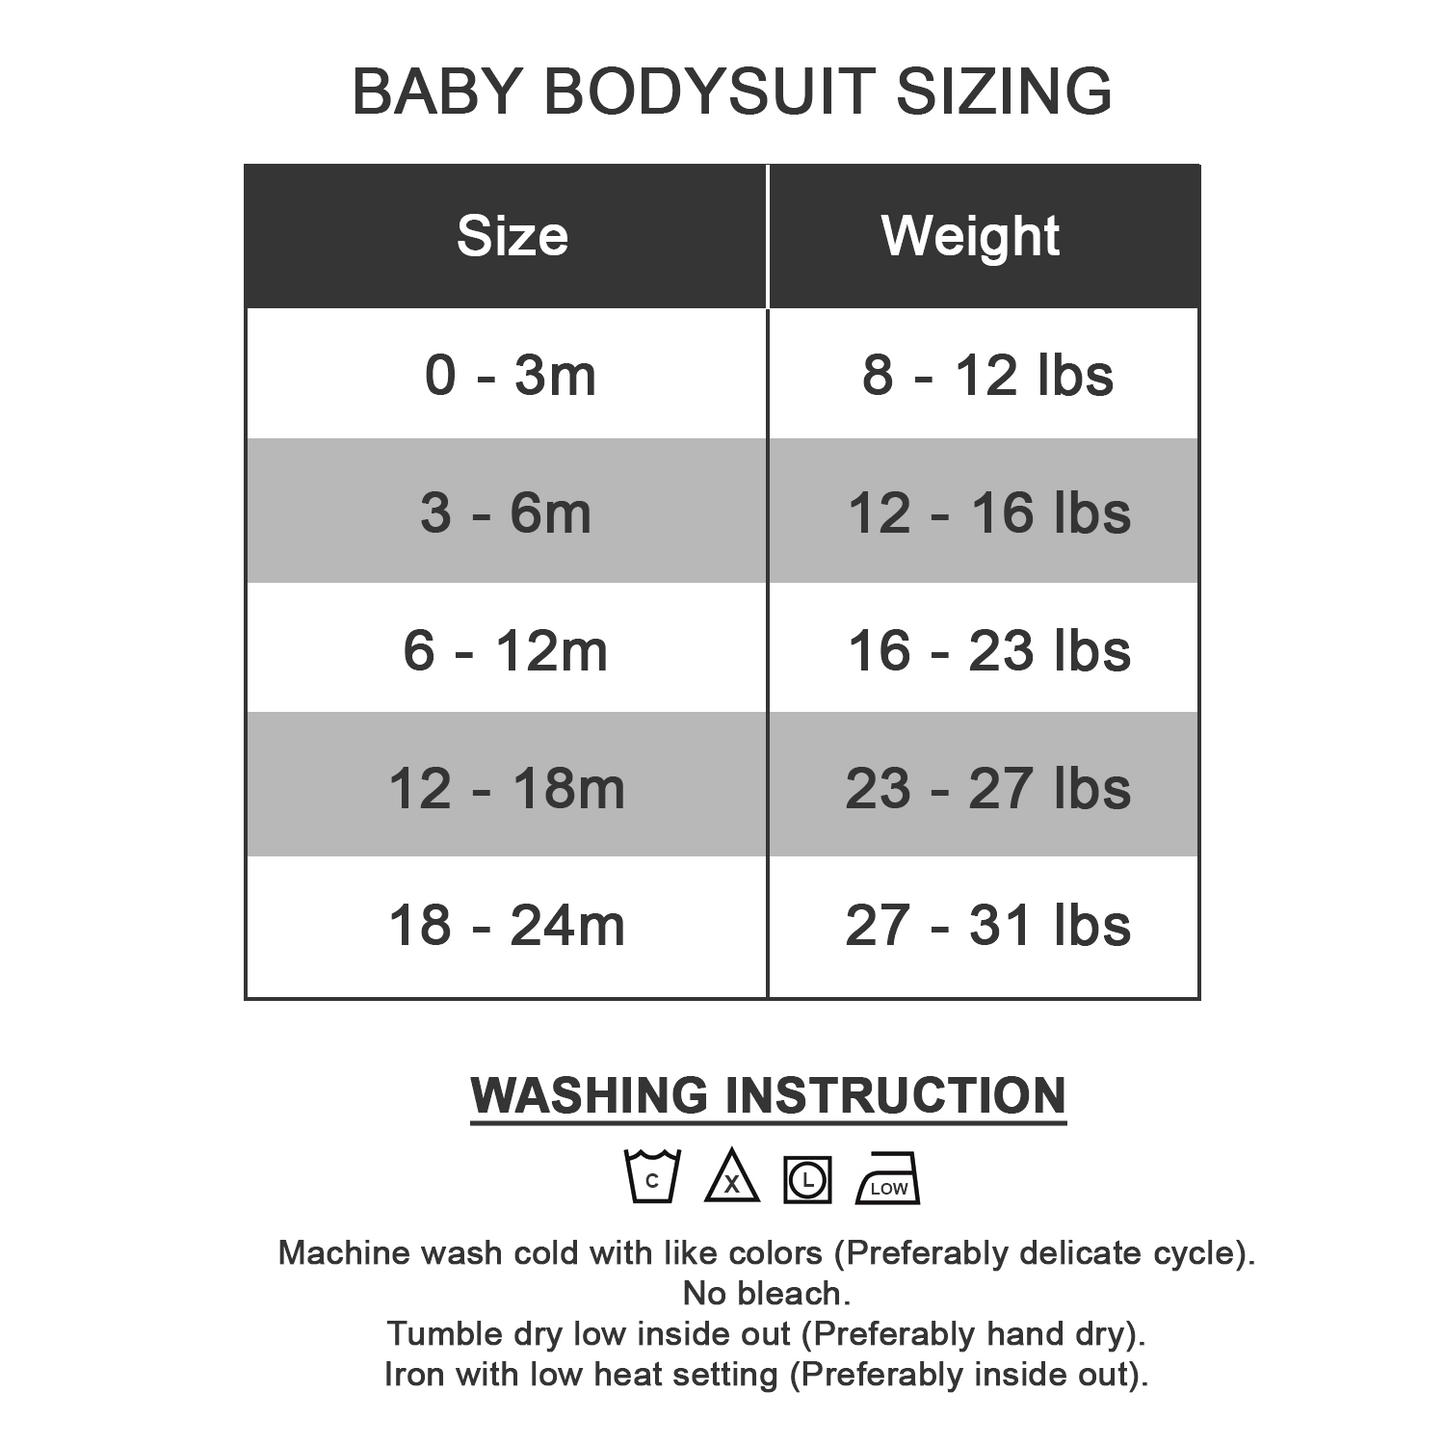 [Personalized] Endanzoo Organic Baby Bodysuit - Single DOG I My Sibling has Paws